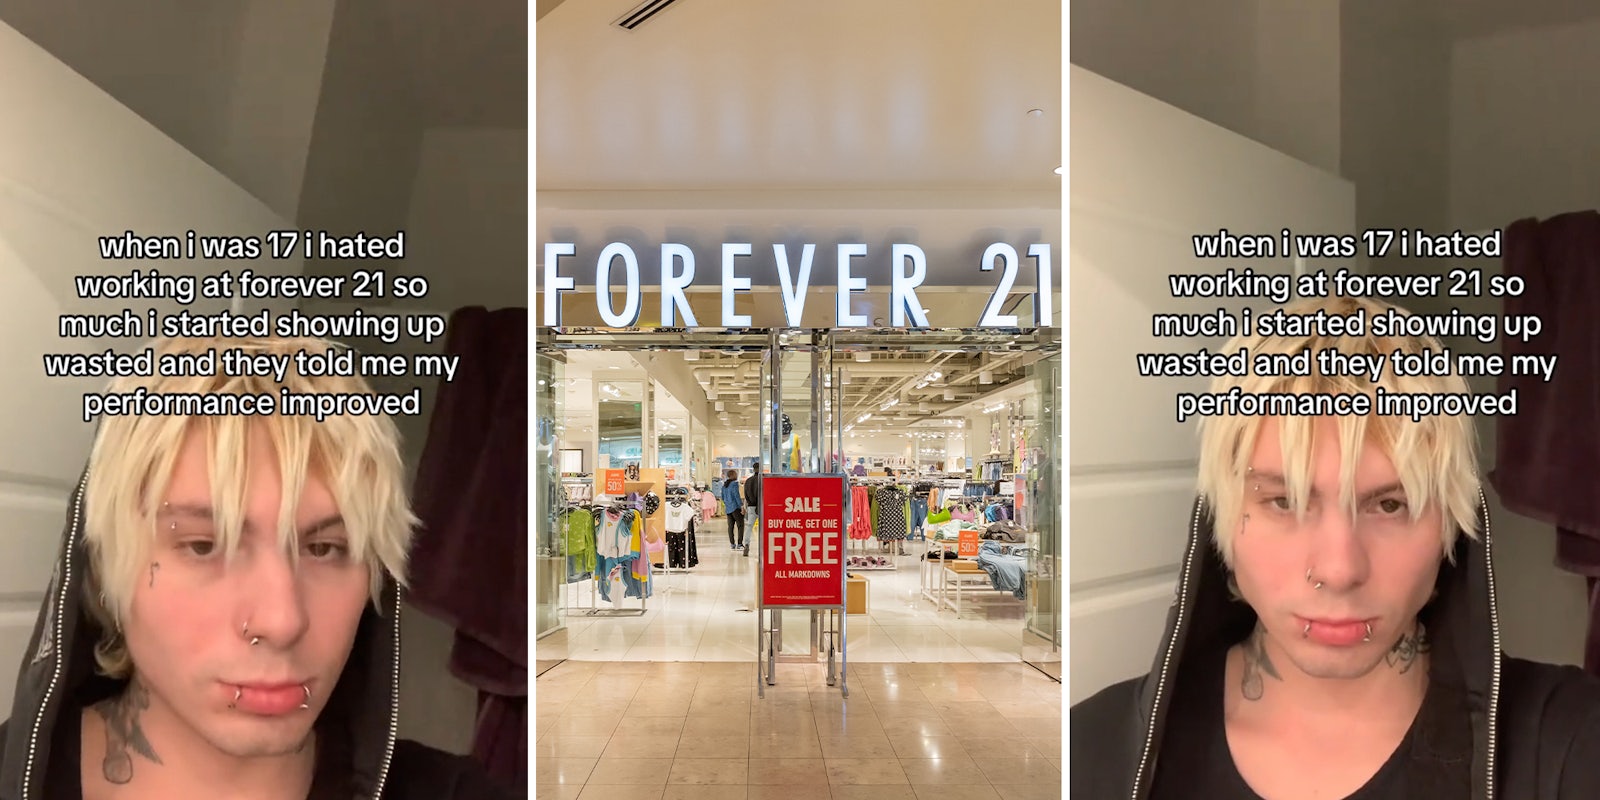 Ex Forever 21 worker says his performance improved inebriated